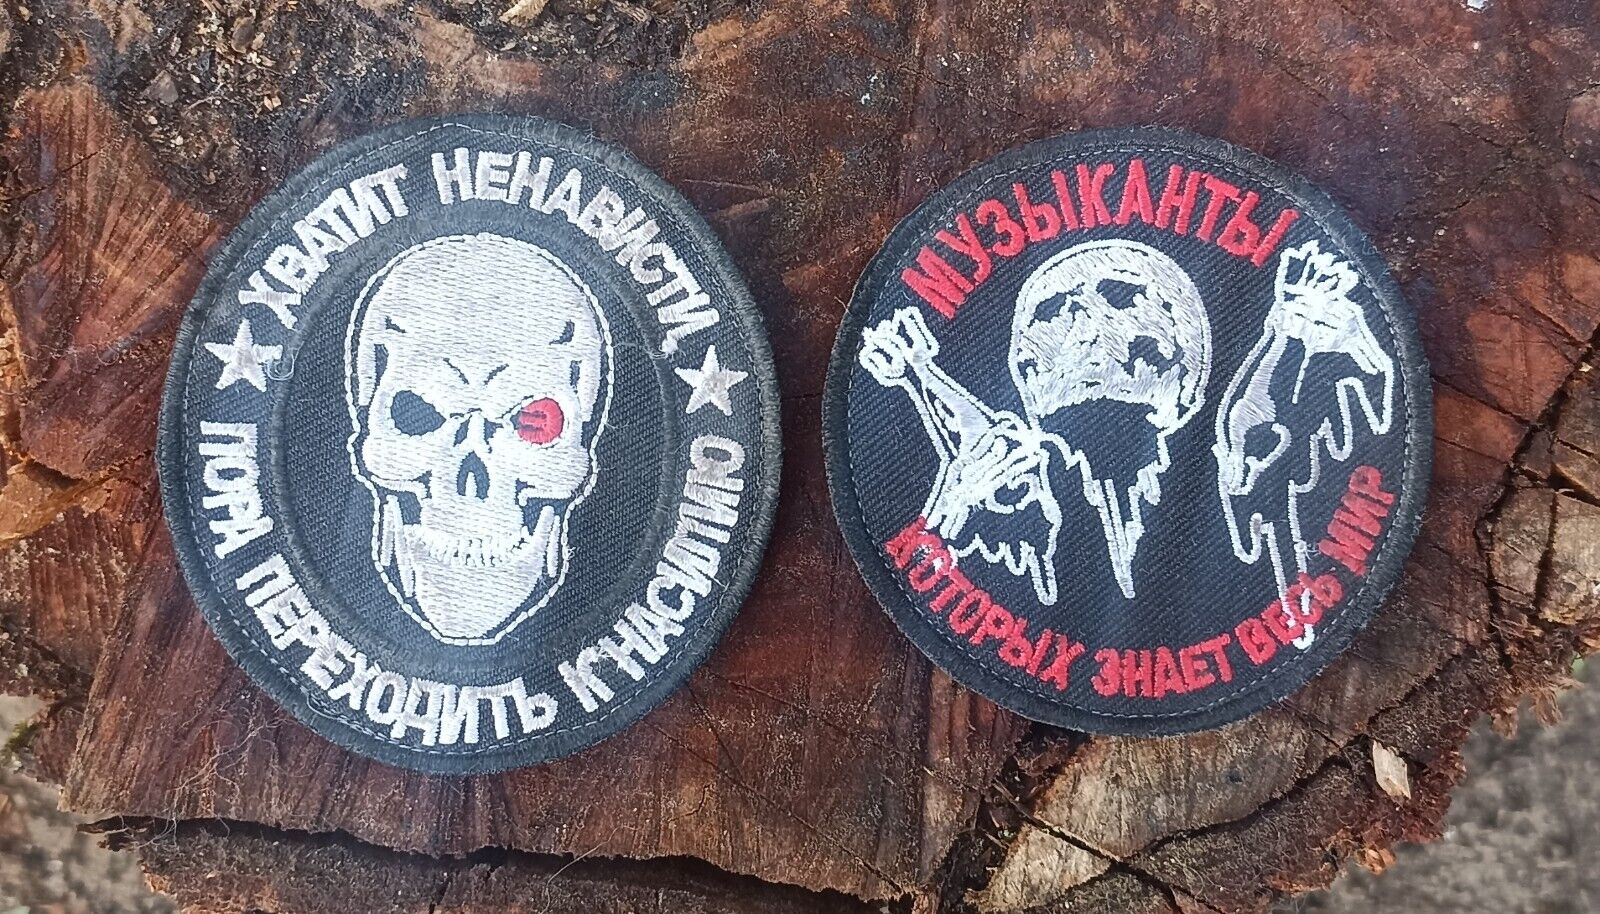 Trophy patches of the occupiers, PMC Wagner. Ukrainian-Russian war 2022.